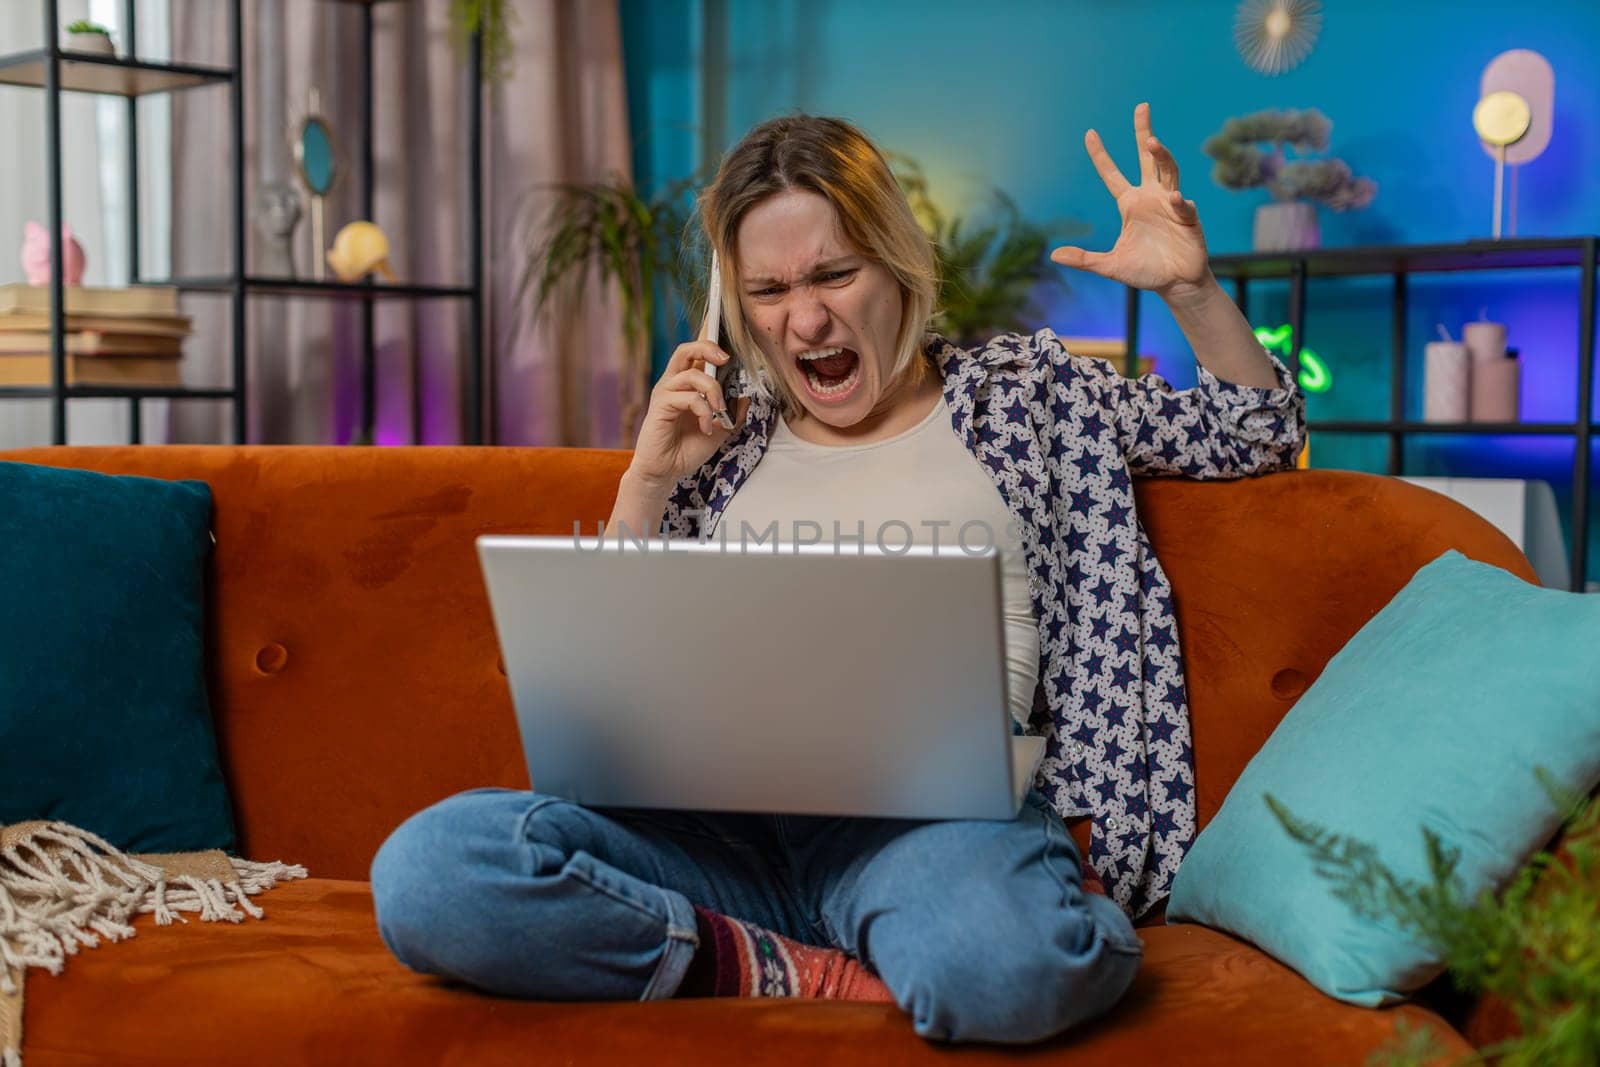 Quarrel. Furious annoyed young woman freelancer engage in heated phone conversations sitting on sofa. Upset Caucasian blonde girl expresses frustration using cellphone and laptop on couch in apartment